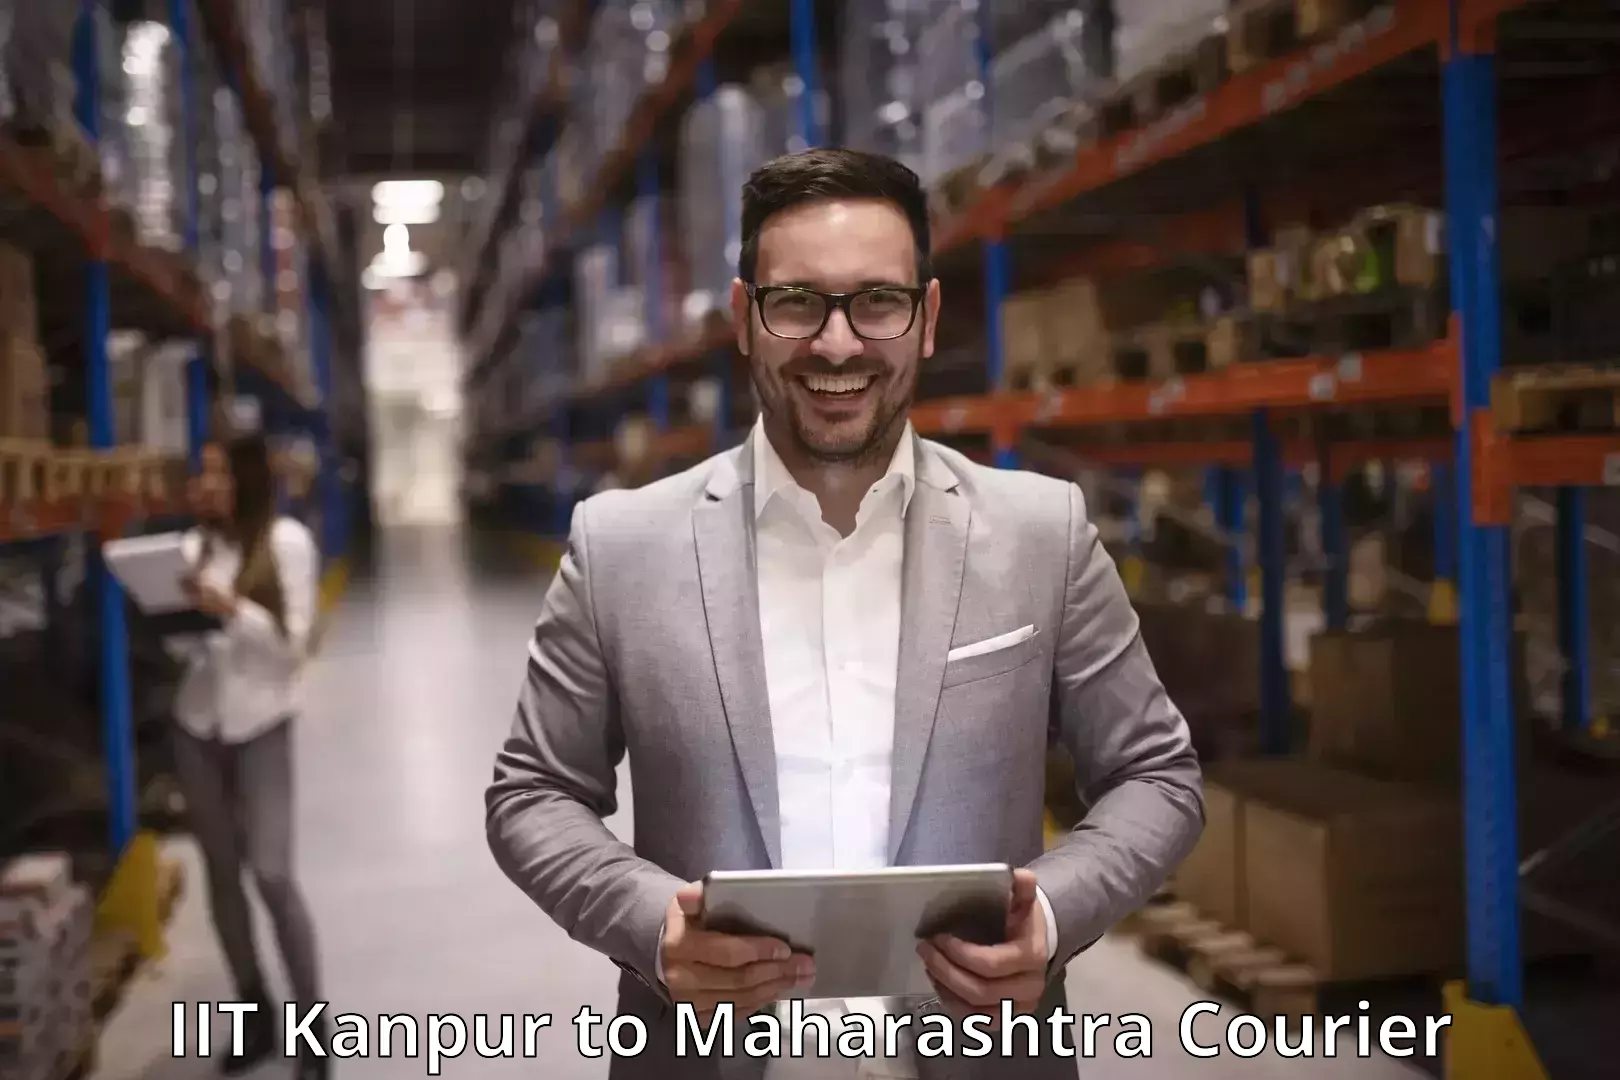 Courier service partnerships IIT Kanpur to Newasa